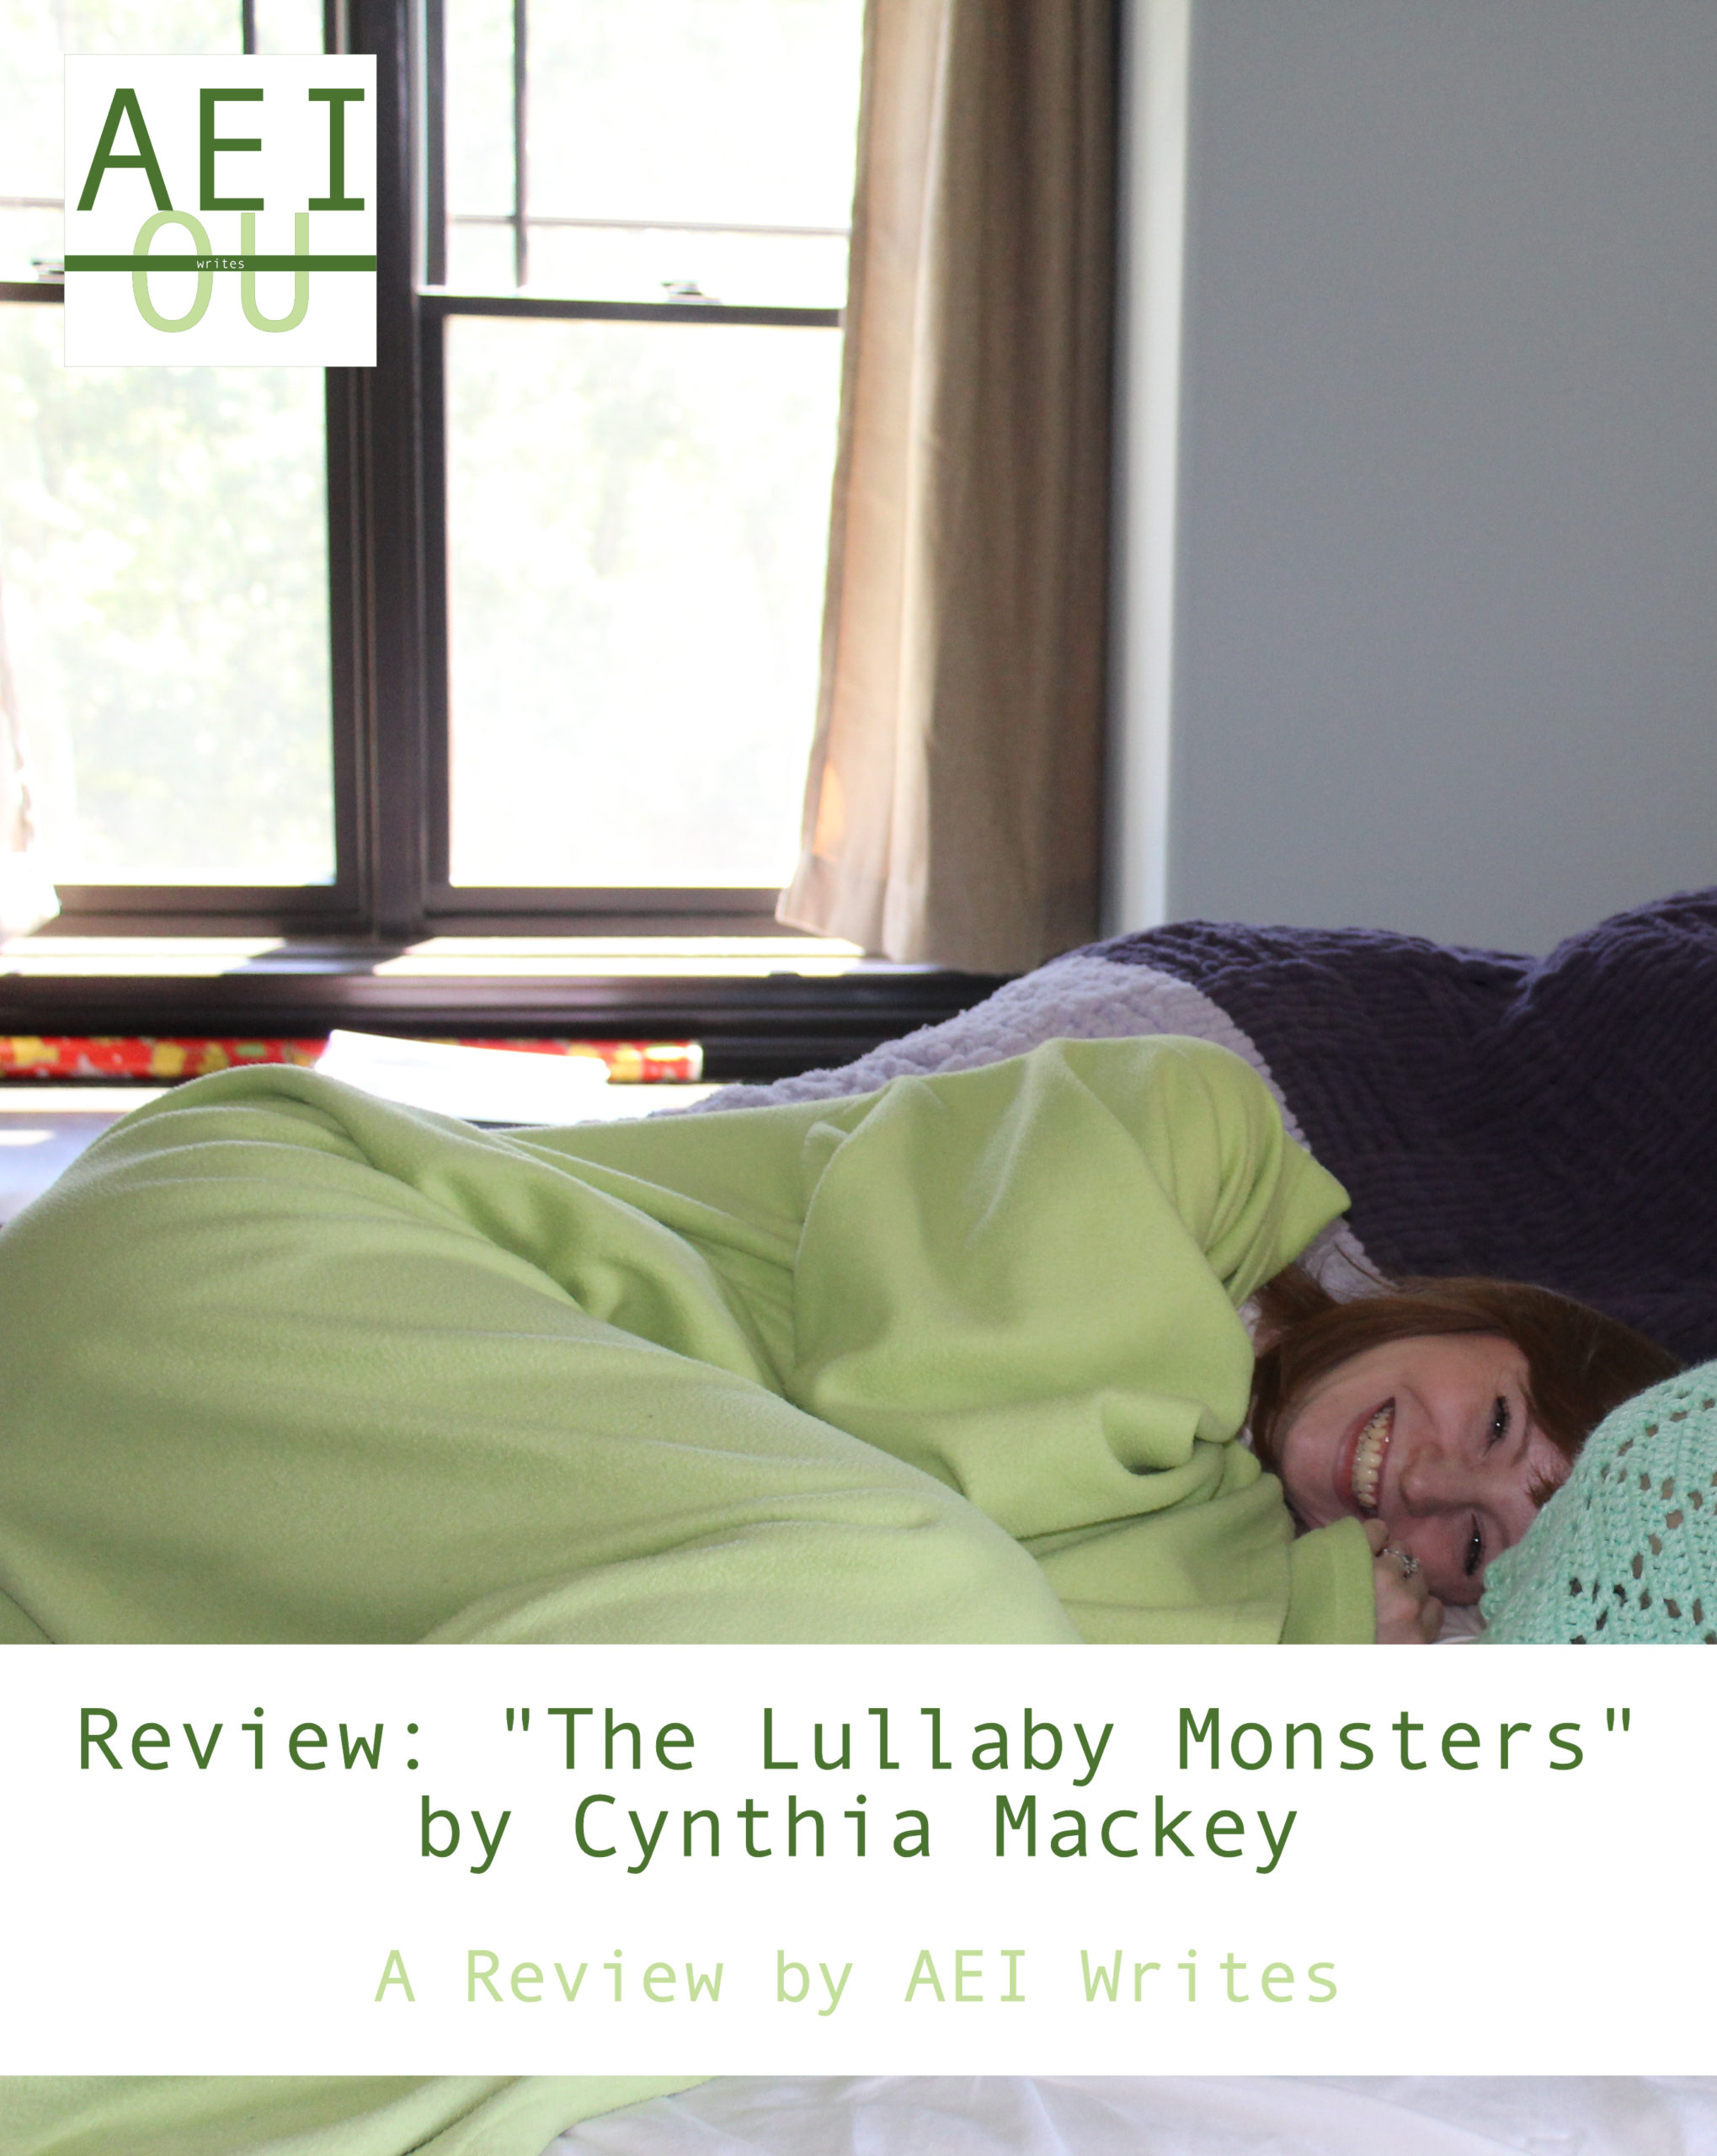 Review: “The Lullaby Monsters” by Cynthia Mackey